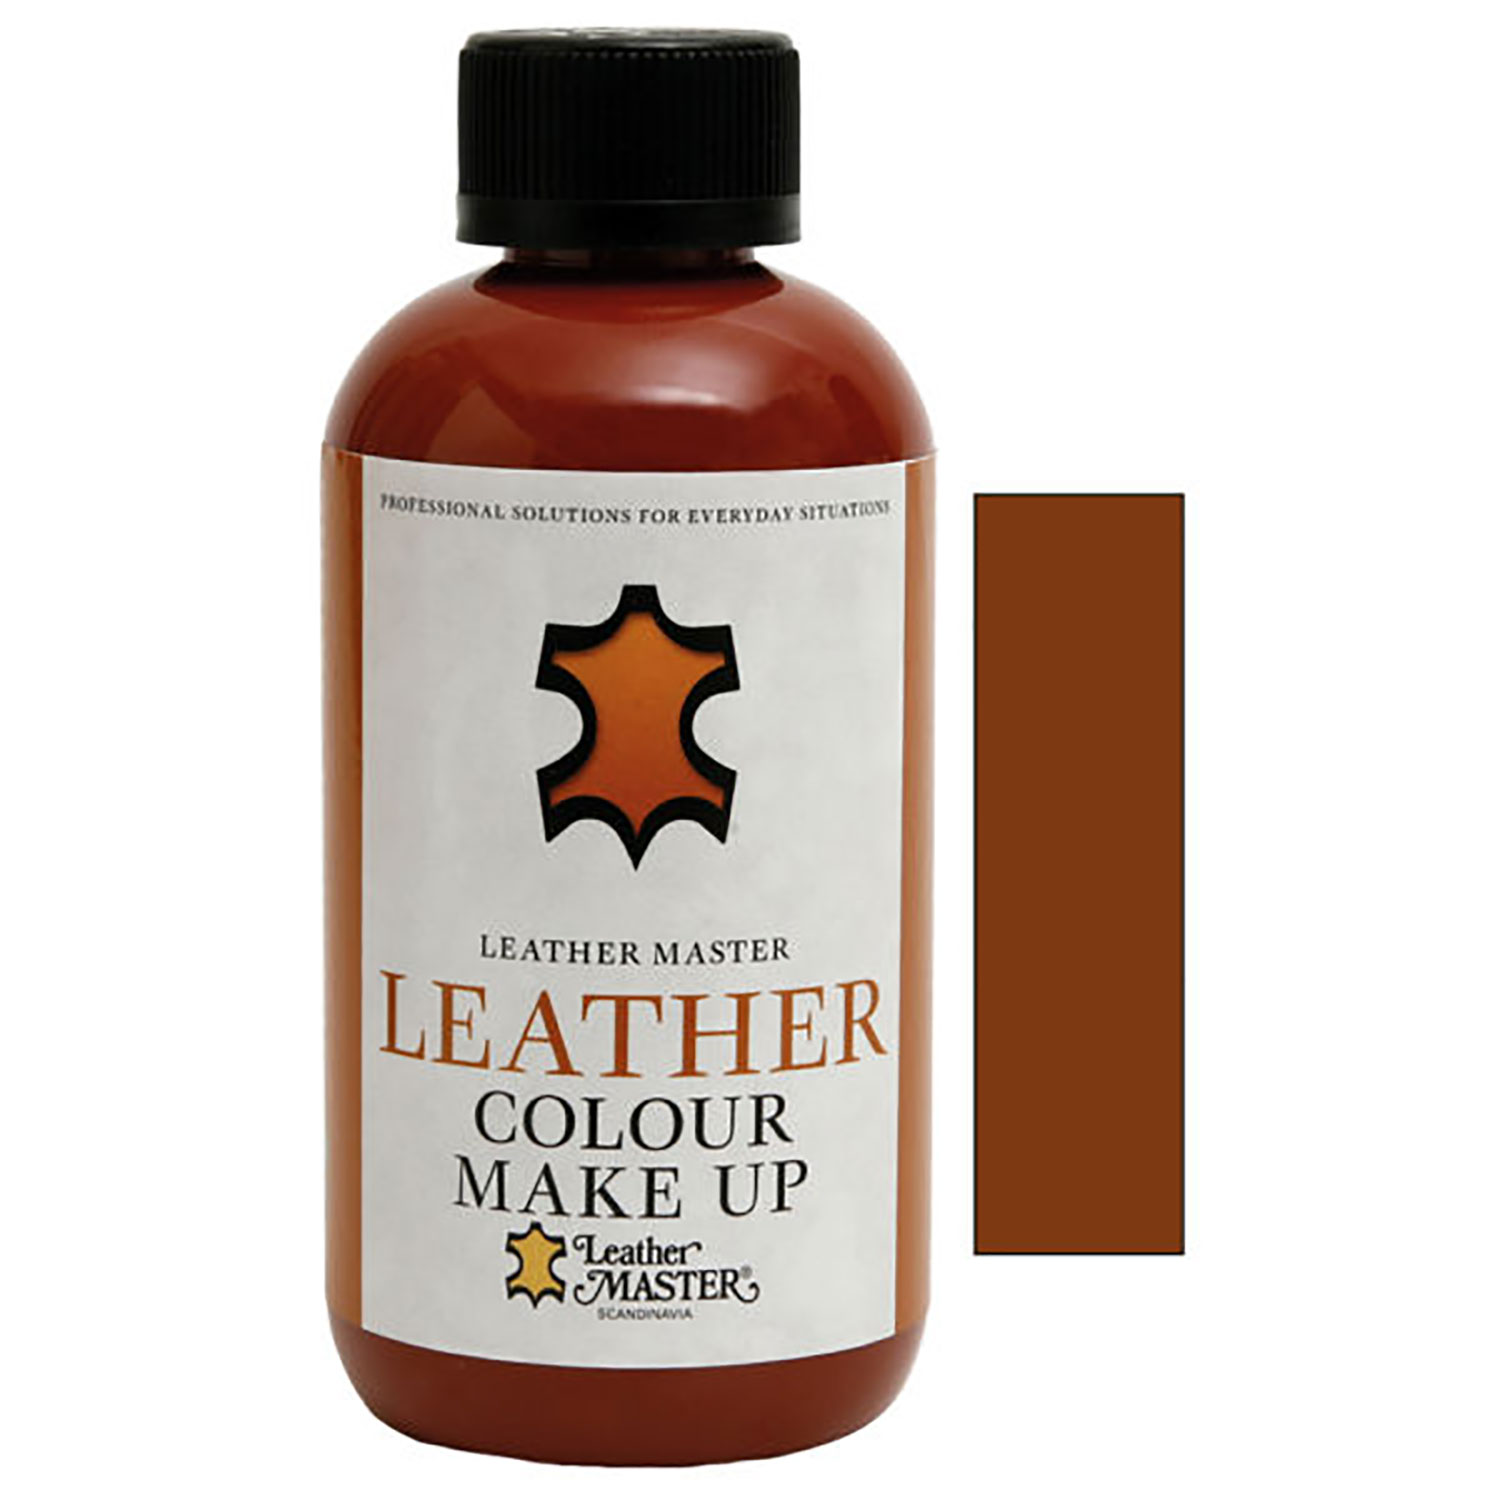 Leather Master Colour make up – light brown 250 ml